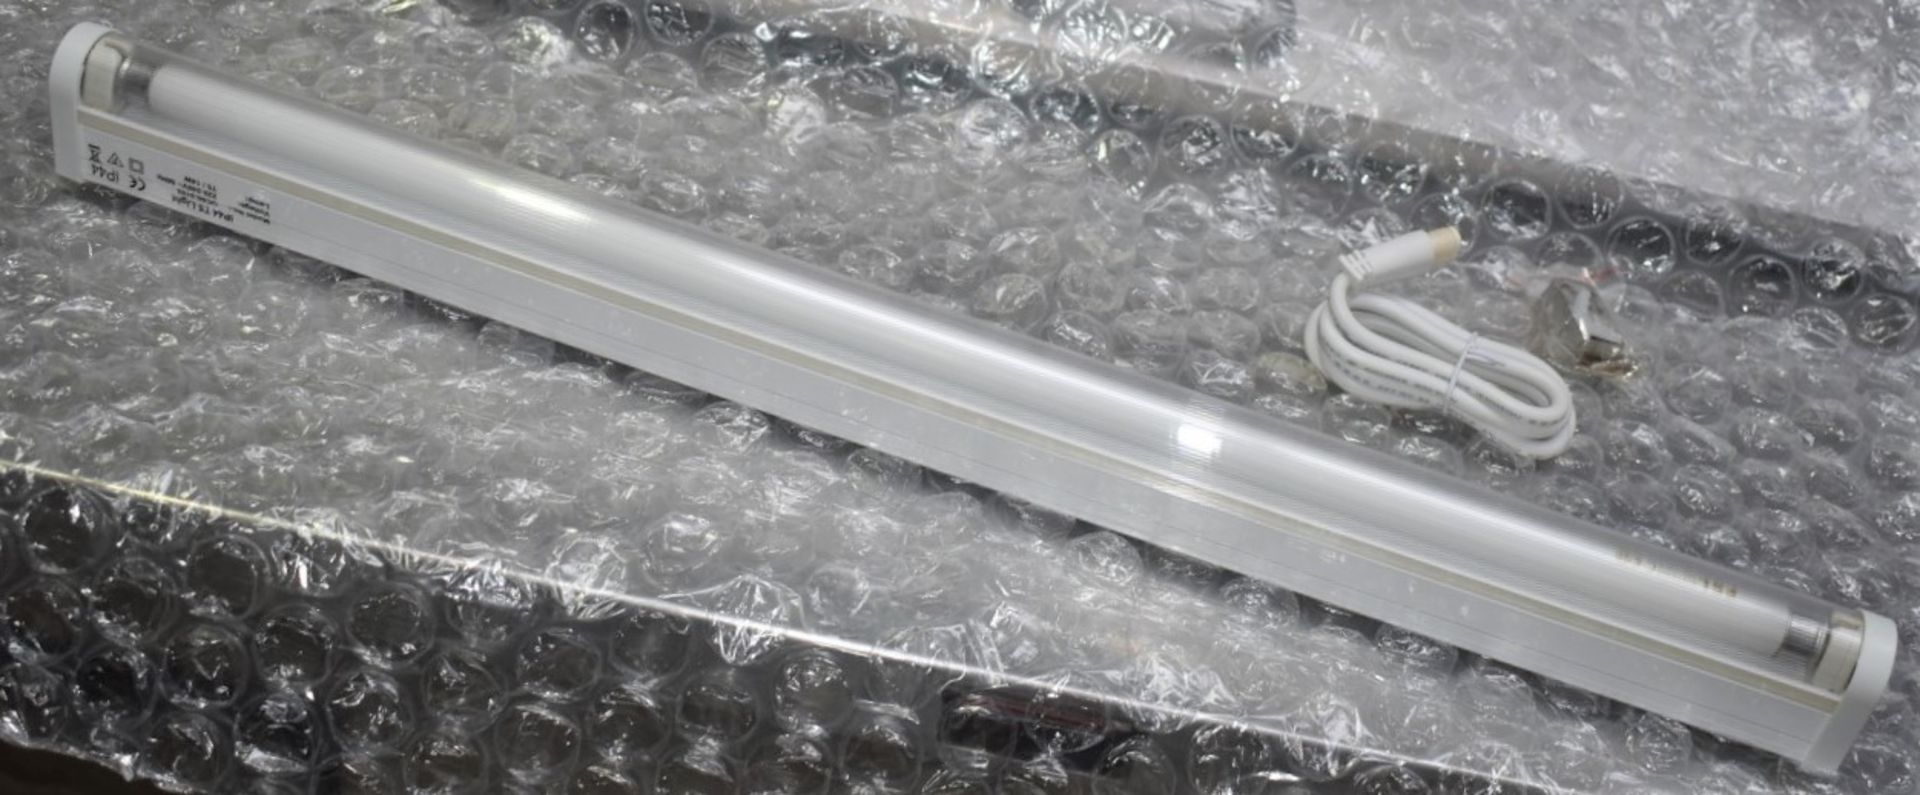 1 x Bathroom Light Fitting - IP44 Waterproof T5 14w Fluorescent Lights With Built-In Electronic - Image 2 of 11